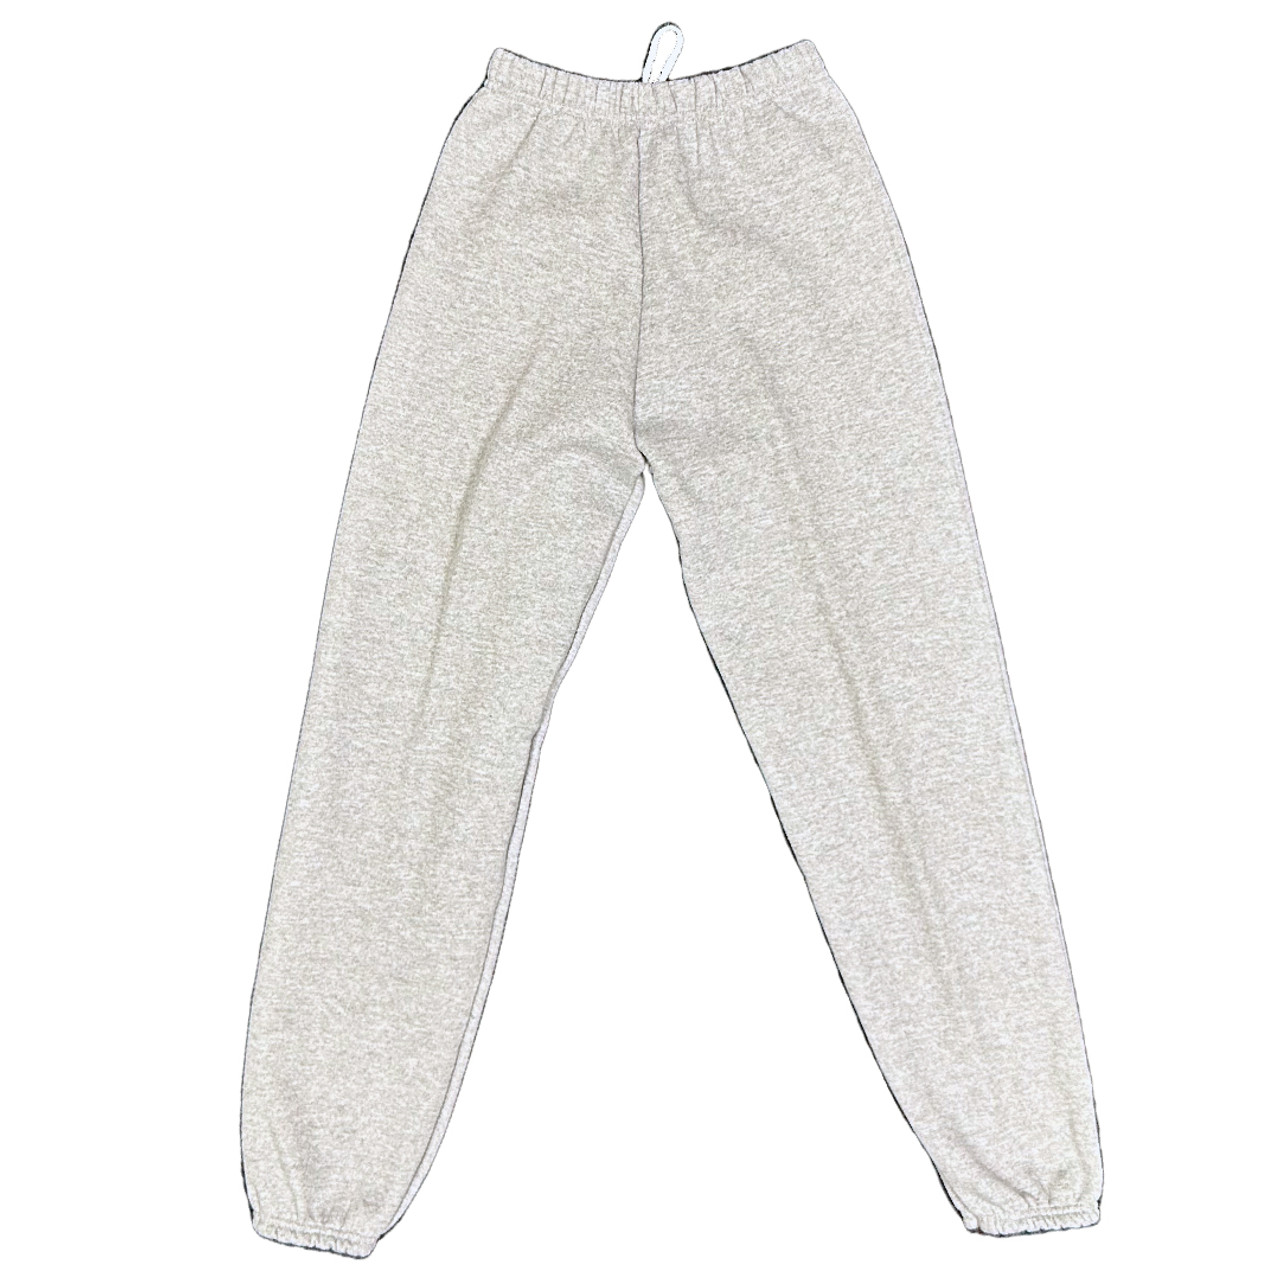 Youth Jogging Pants, Heather Gray